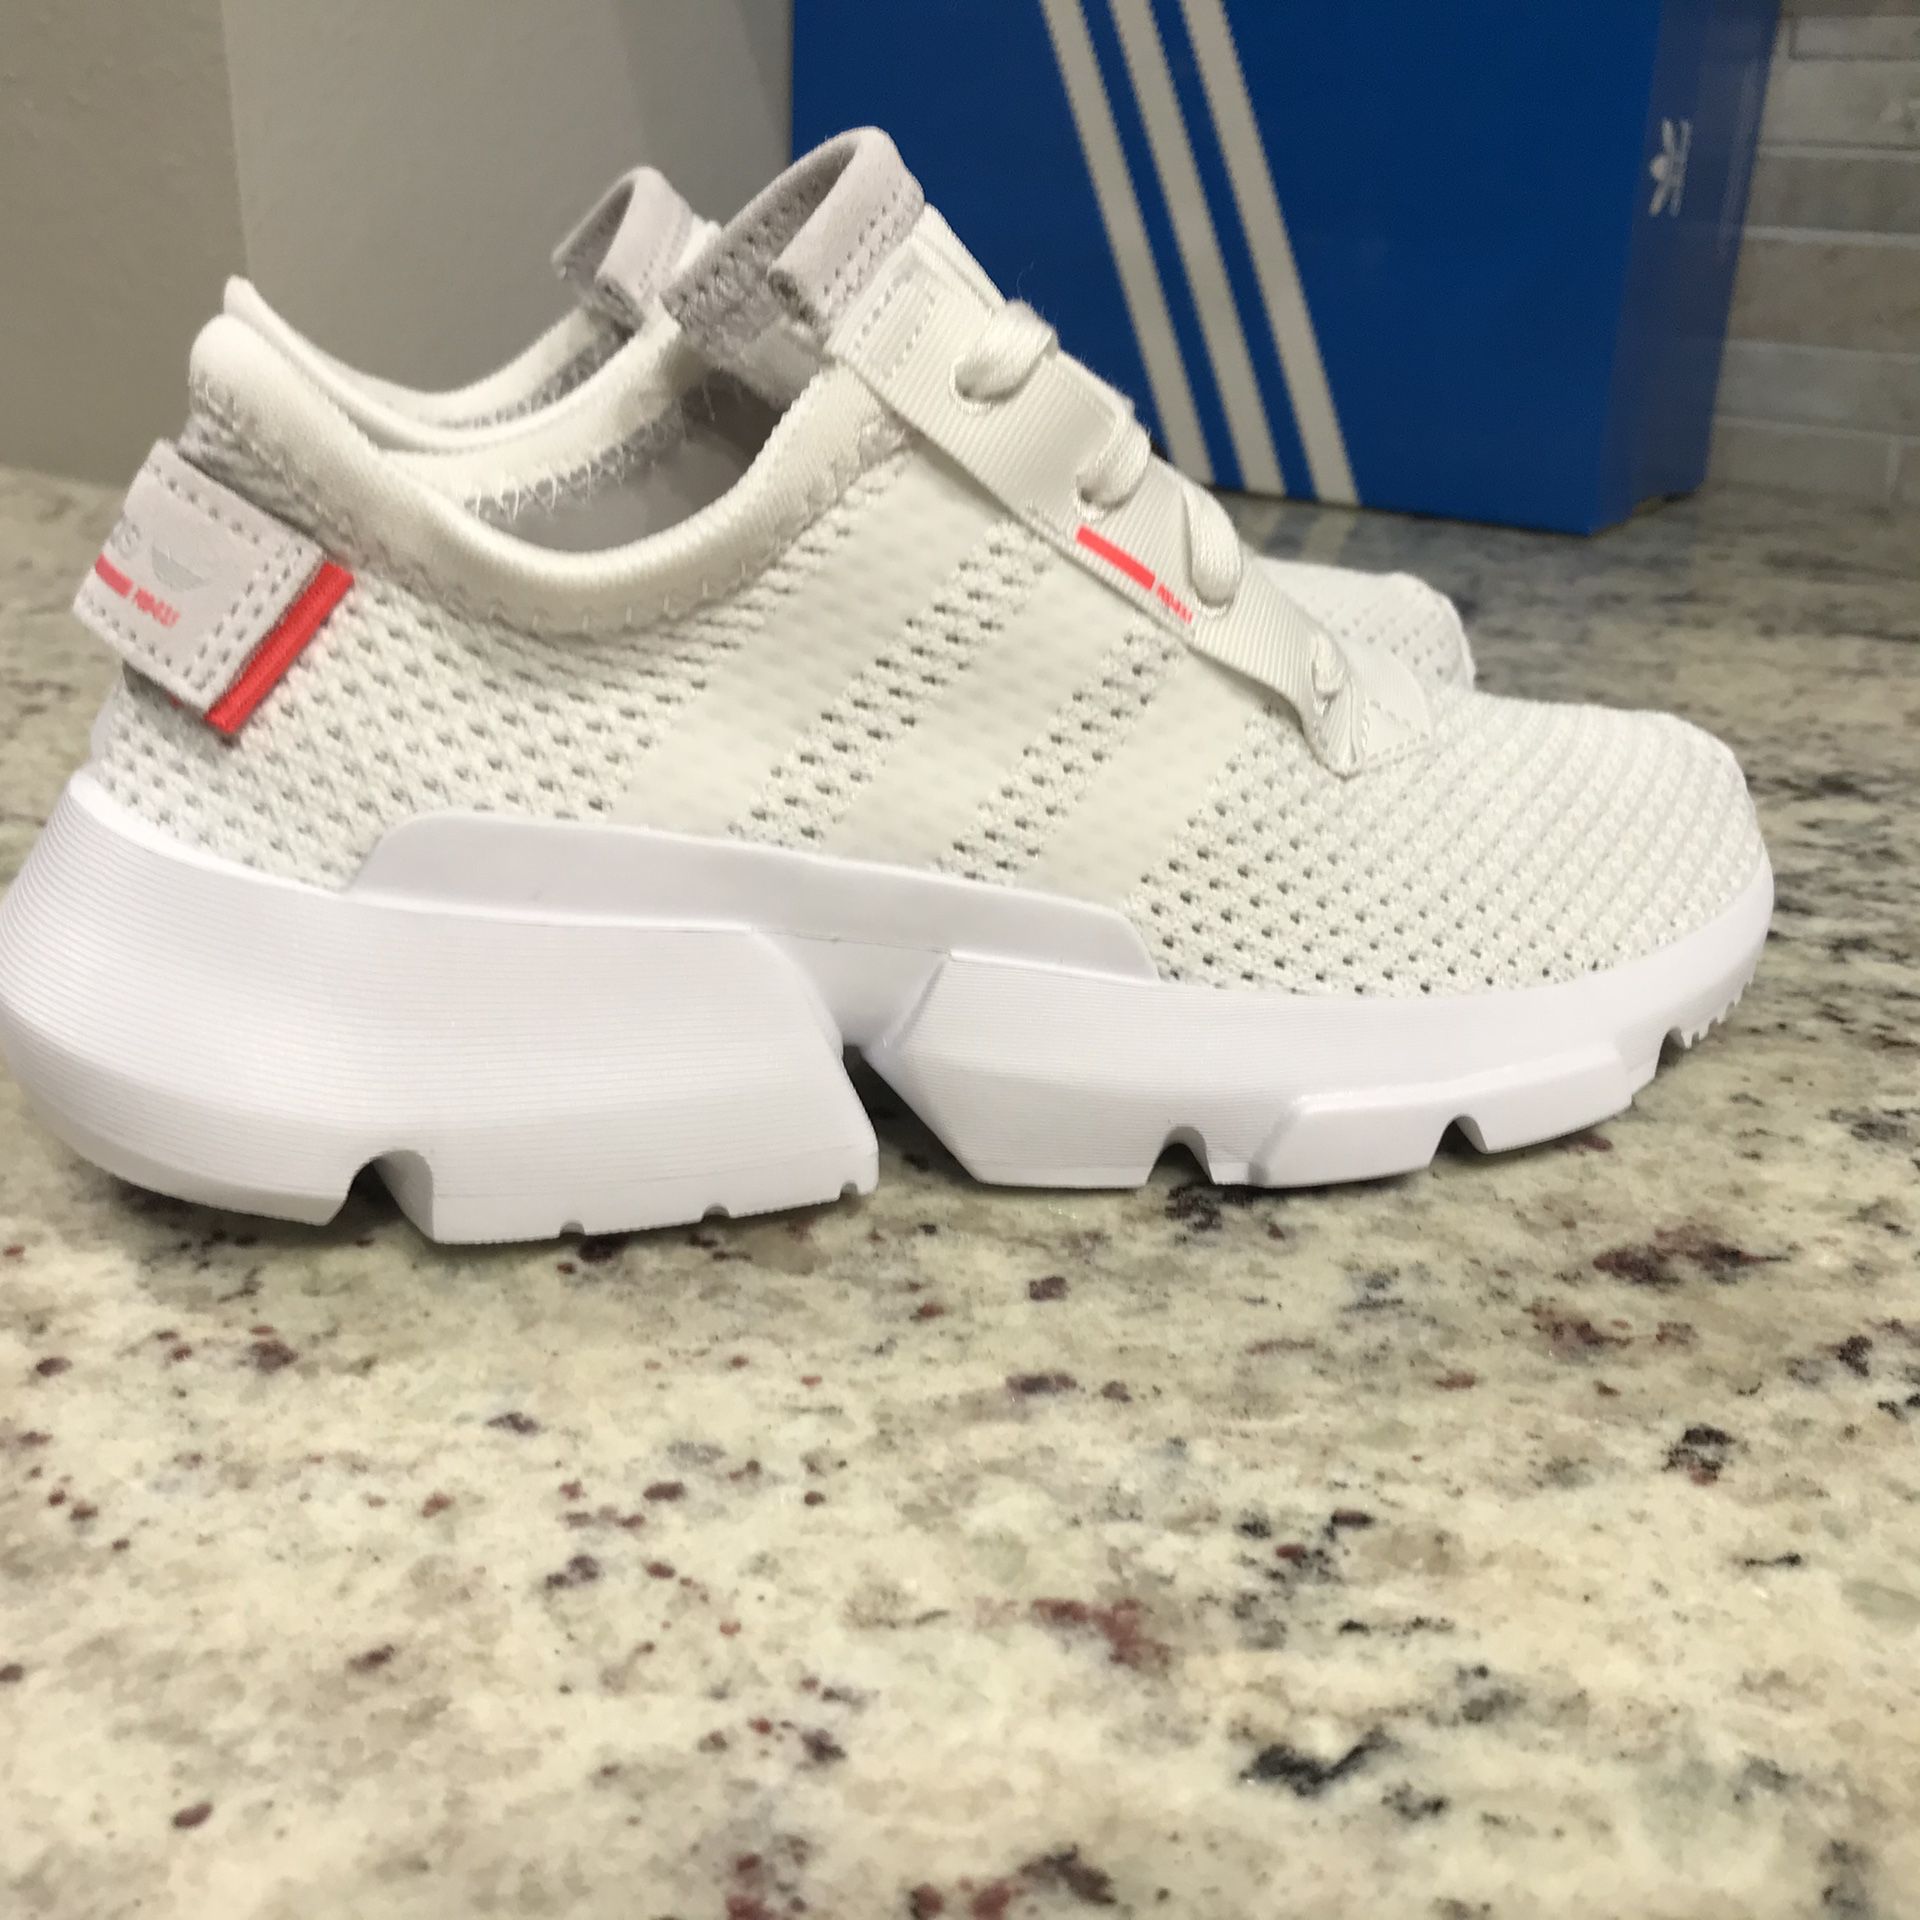 🆕 BRAND NEW Adidas POD S3.1 Shoes